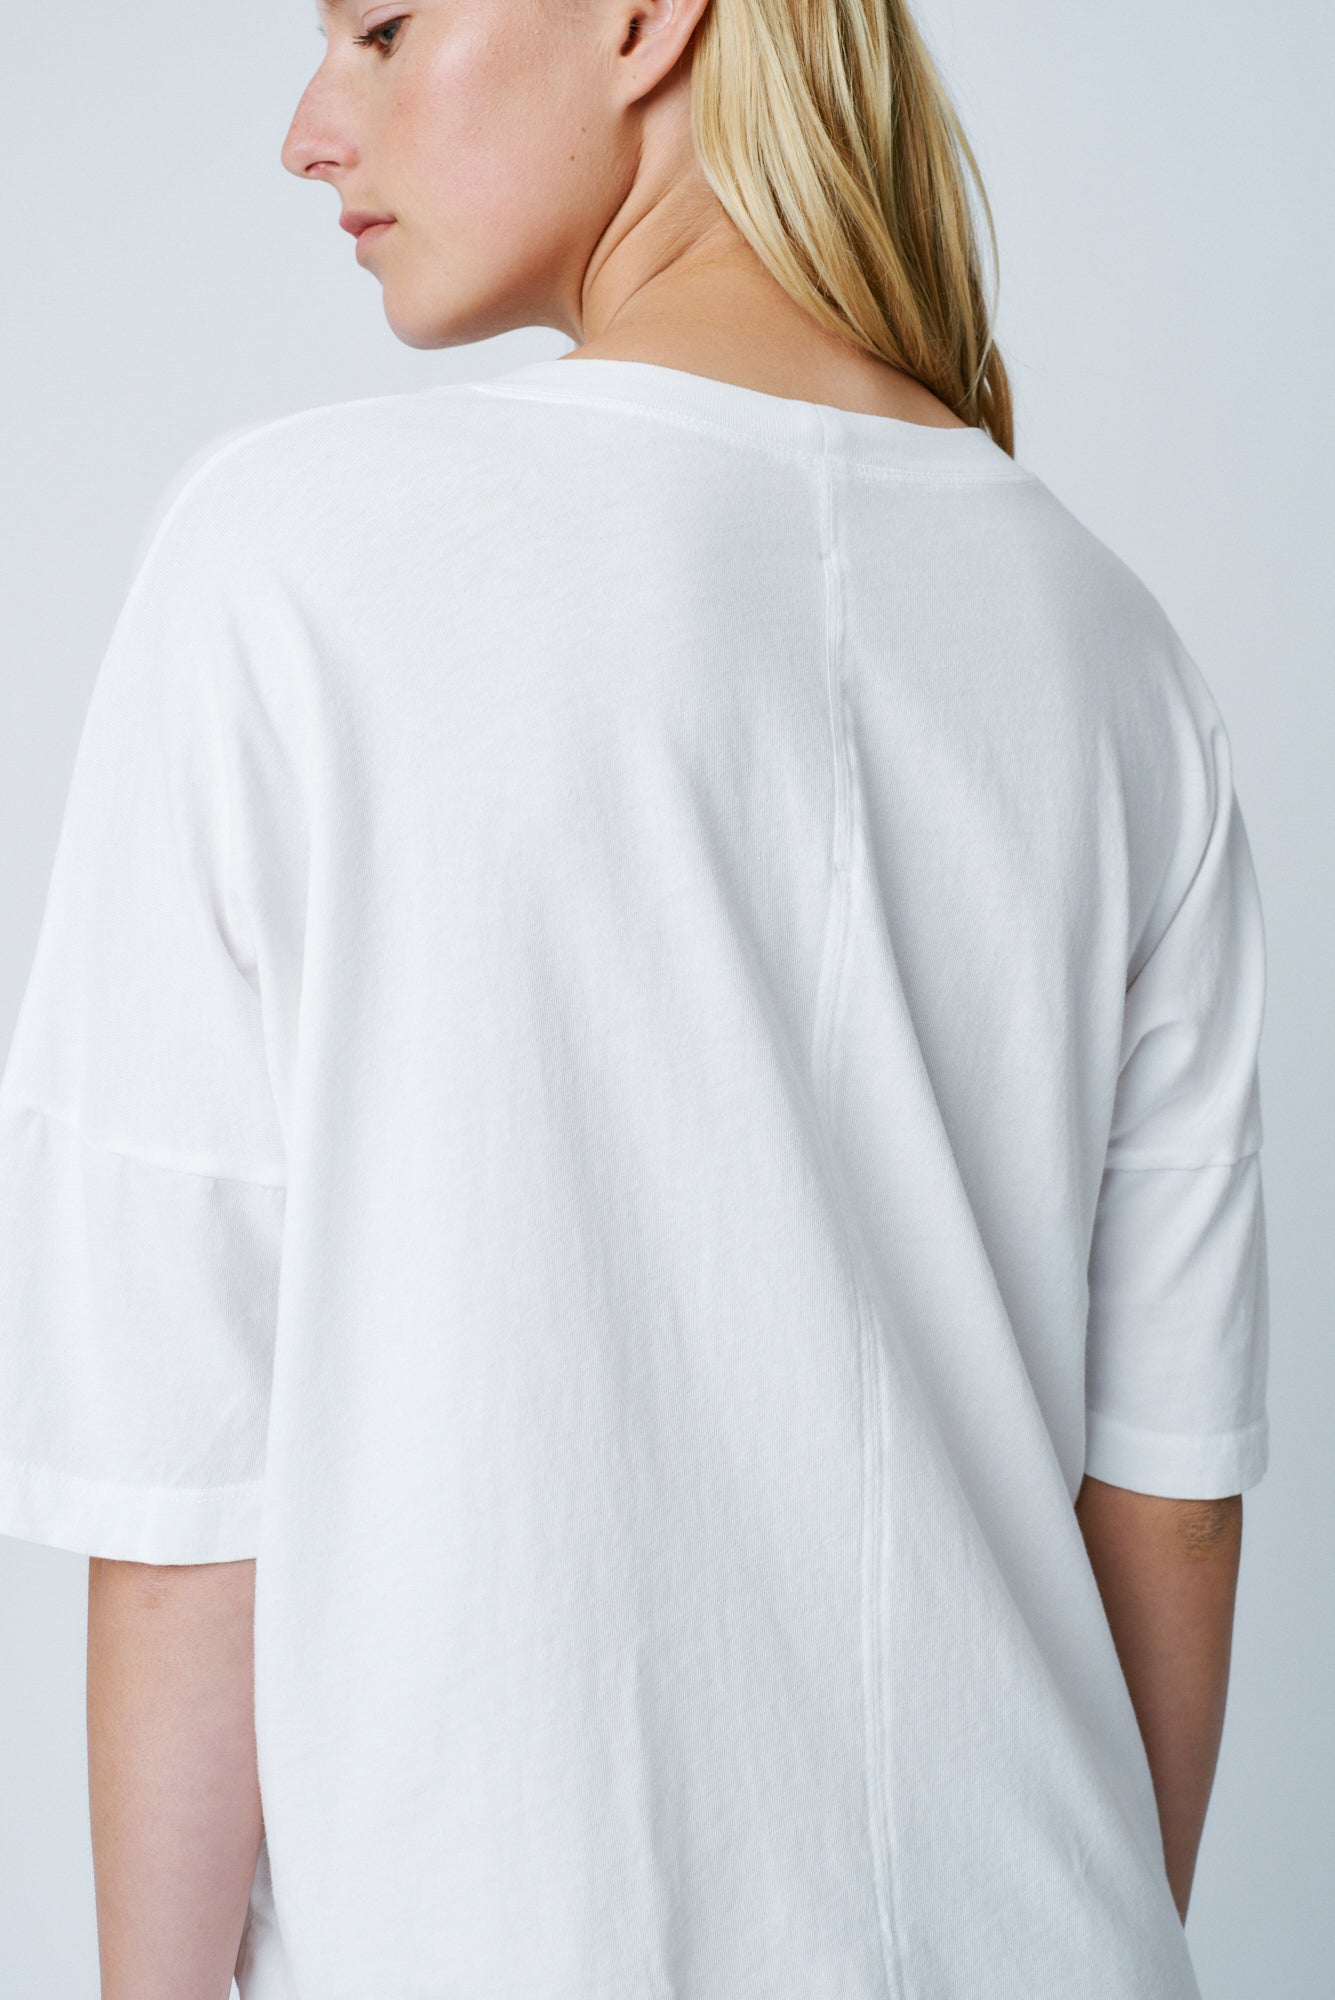 Washed White Classic Jersey Boxy Tee Back Close-Up View